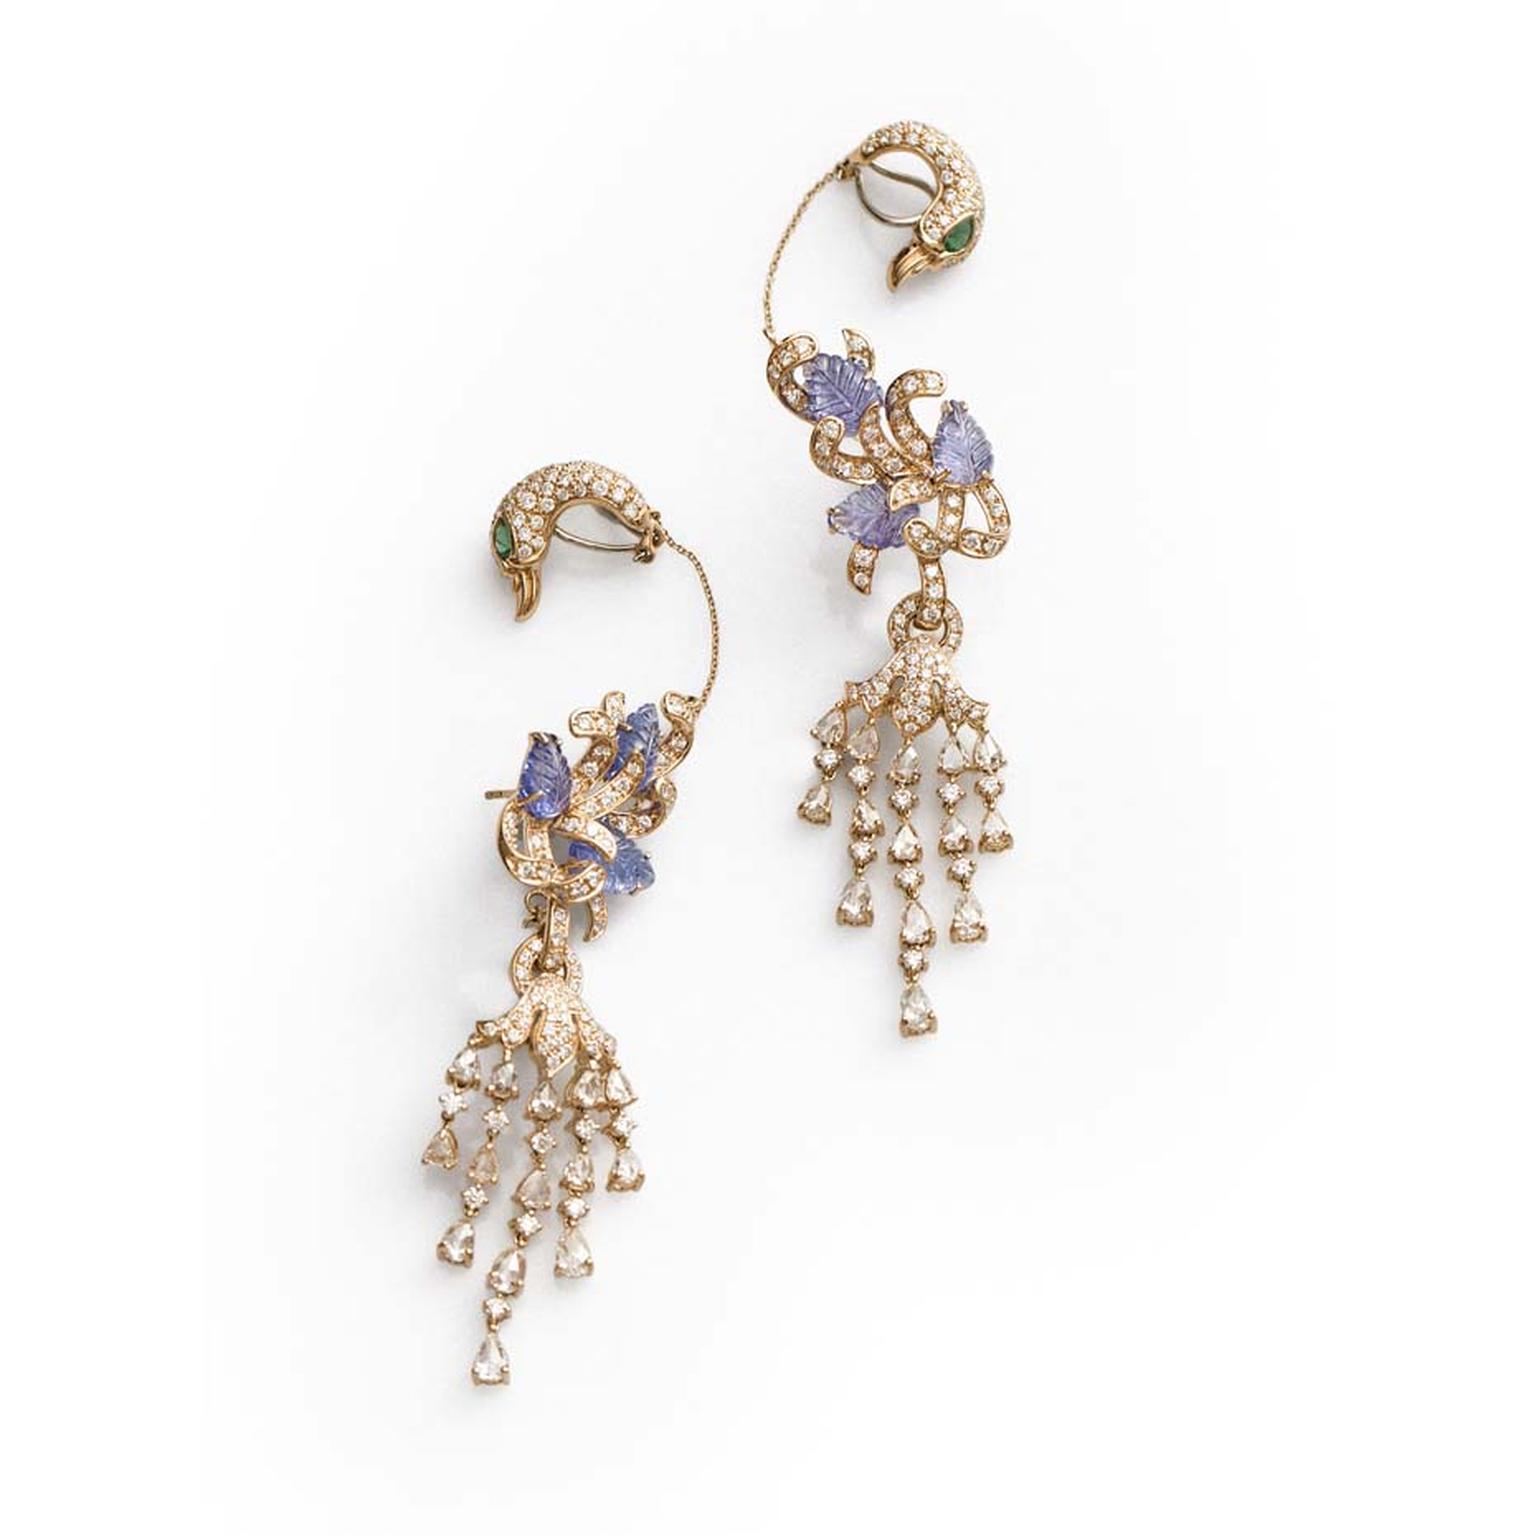 Peacock-inspired emerald and carved tanzanite Farah Khan ear cuffs in yellow gold and diamonds, from the new Le Jardin Exotique summer jewellery collection.